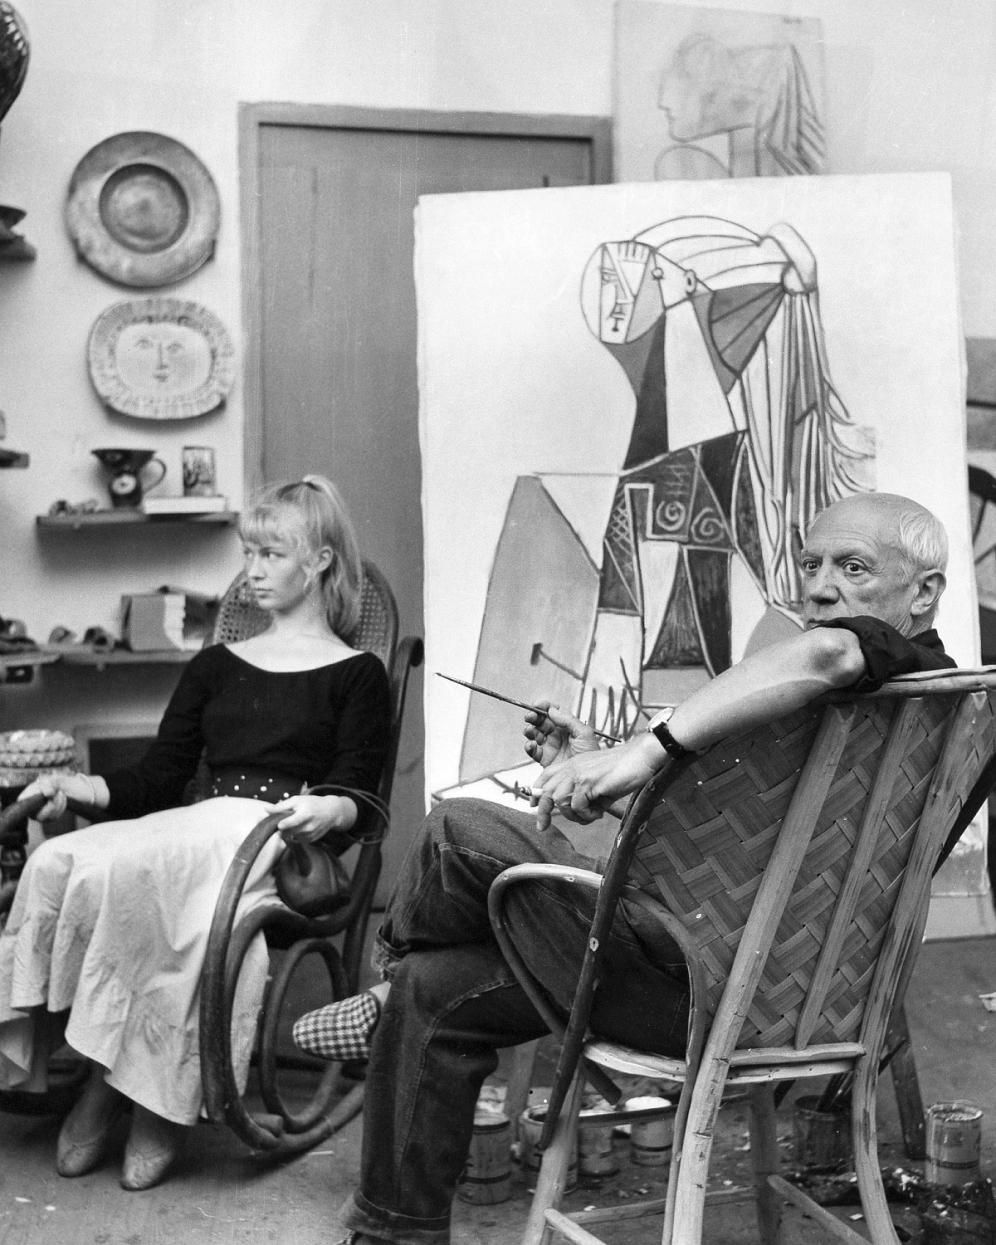 Pablo Picasso And His Model Sylvette David.jpg